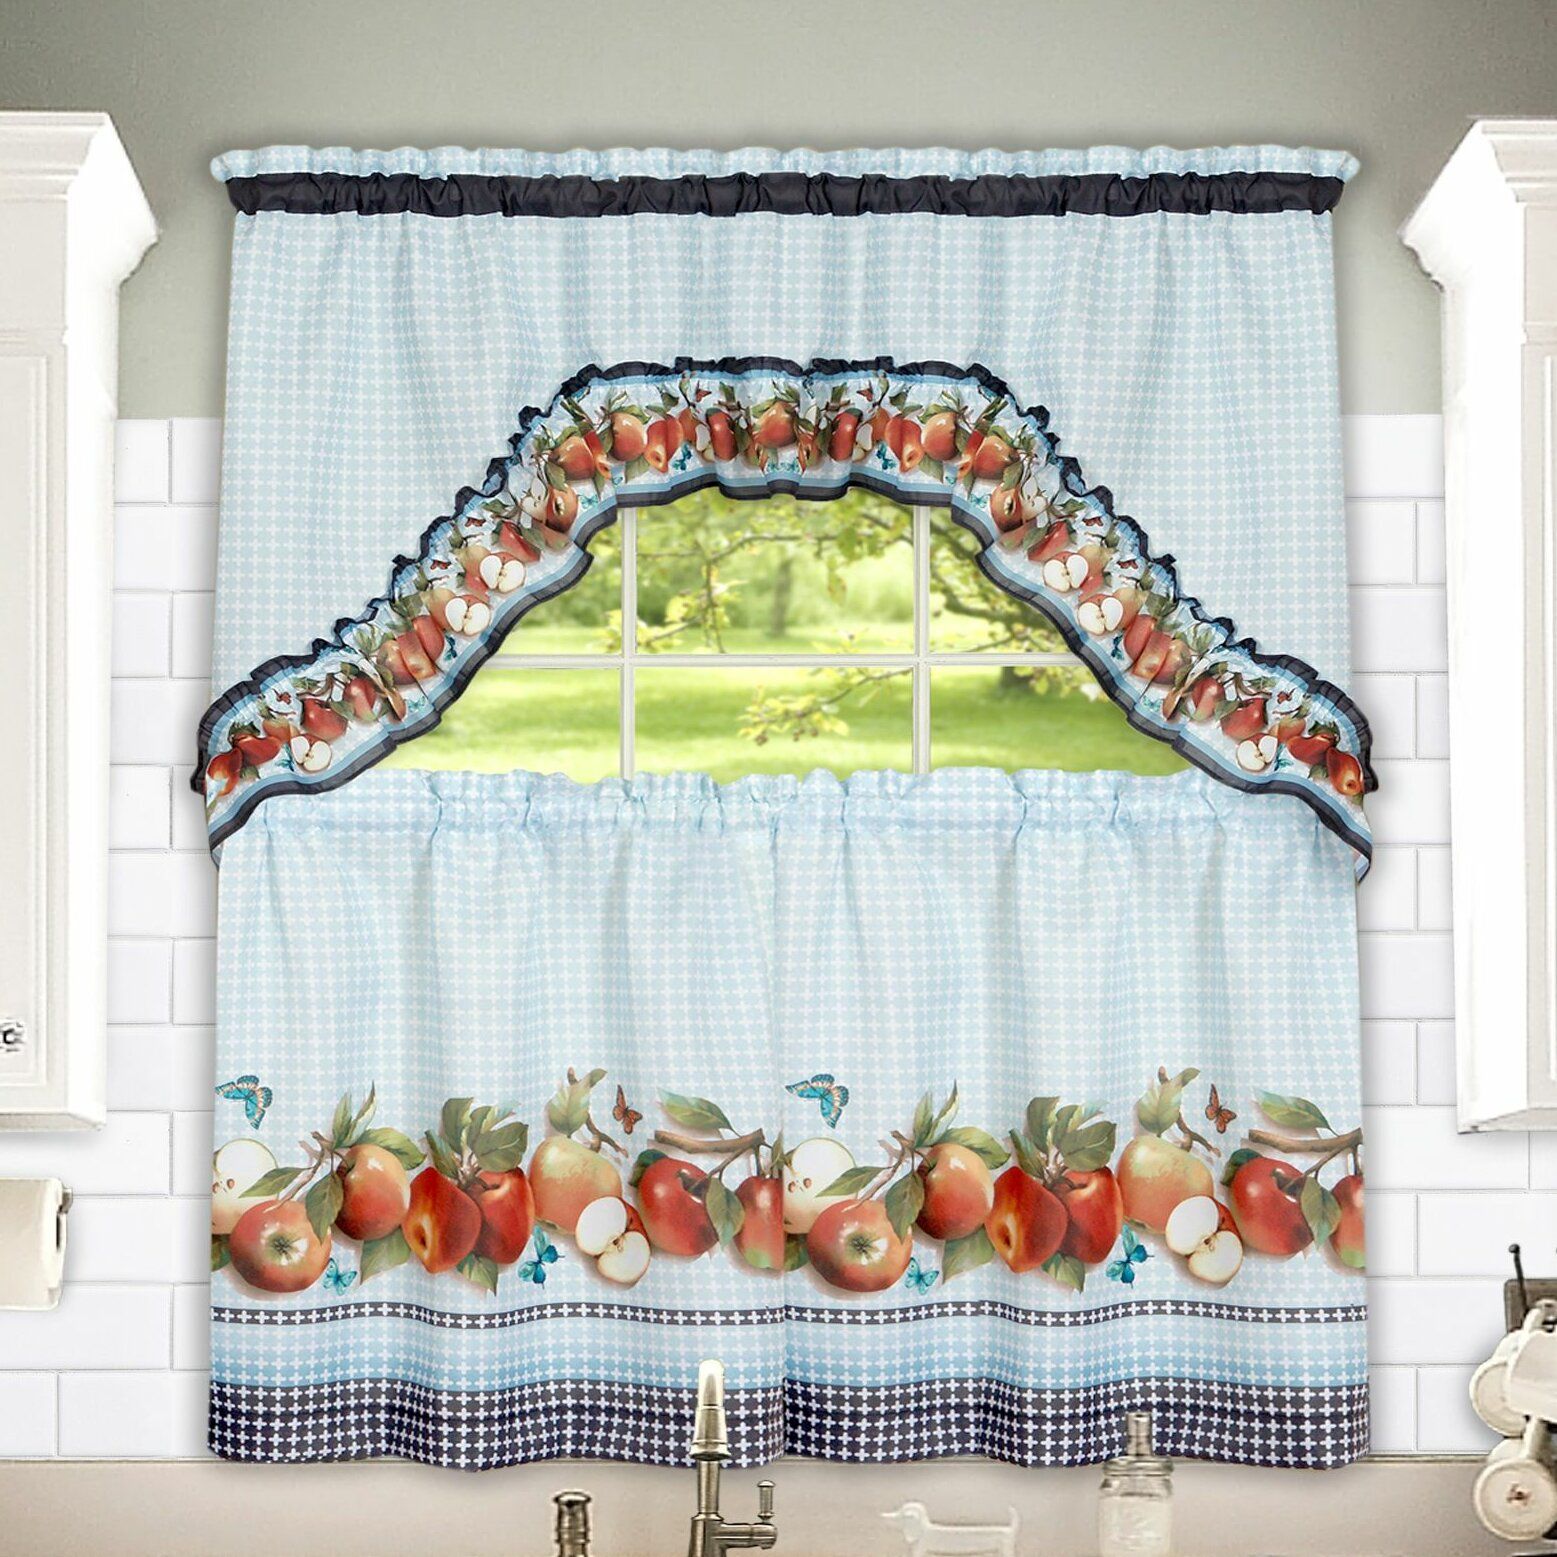 Golden Delicious 57" Tier And Swag Set With Regard To Traditional Tailored Tier And Swag Window Curtains Sets With Ornate Flower Garden Print (View 18 of 20)